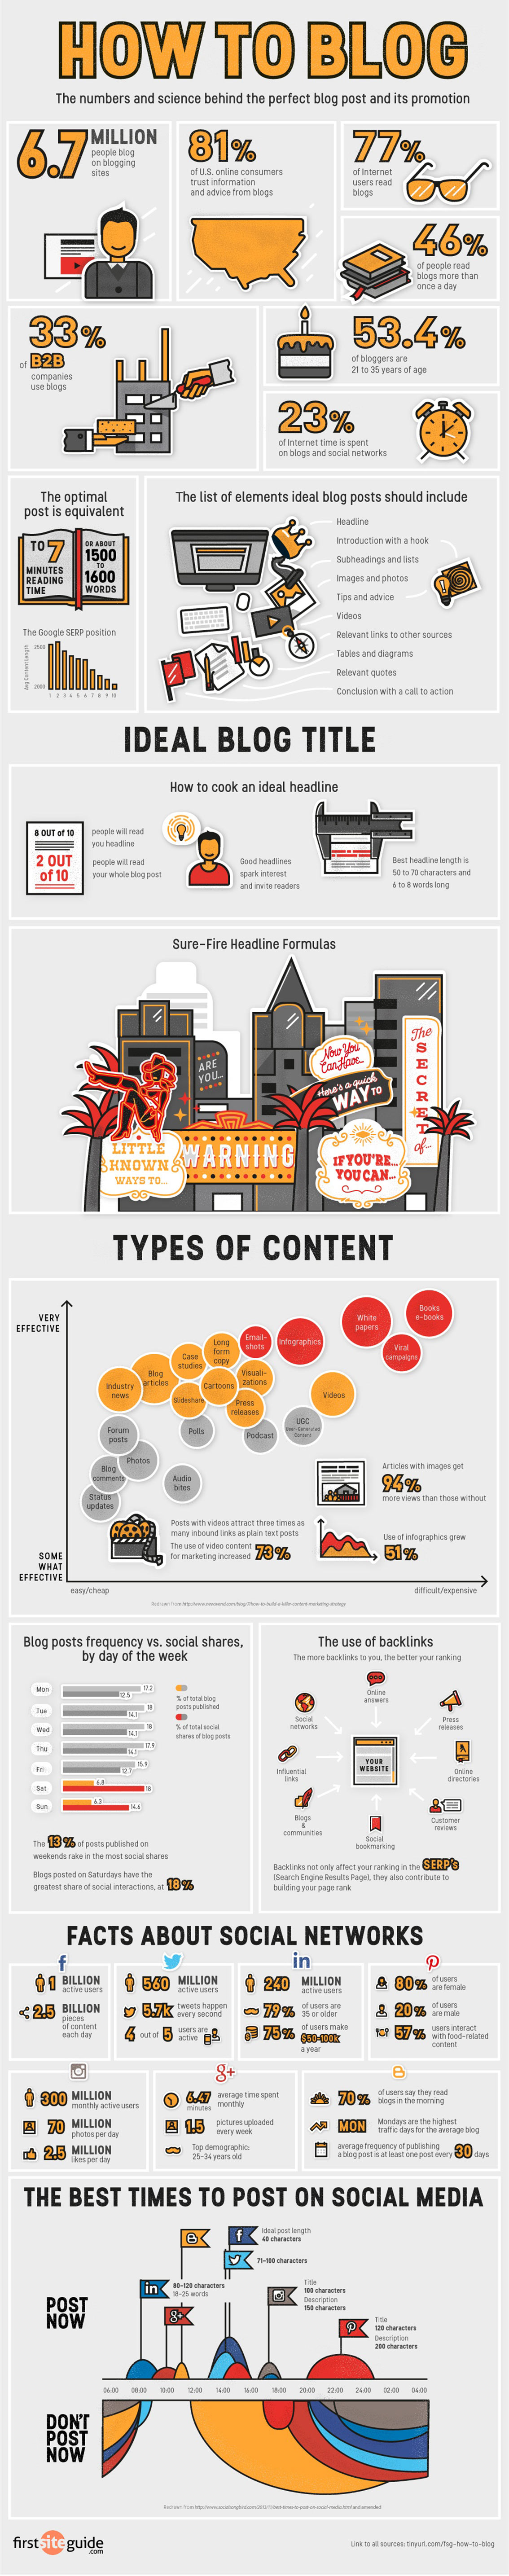 How to Blog Infographic